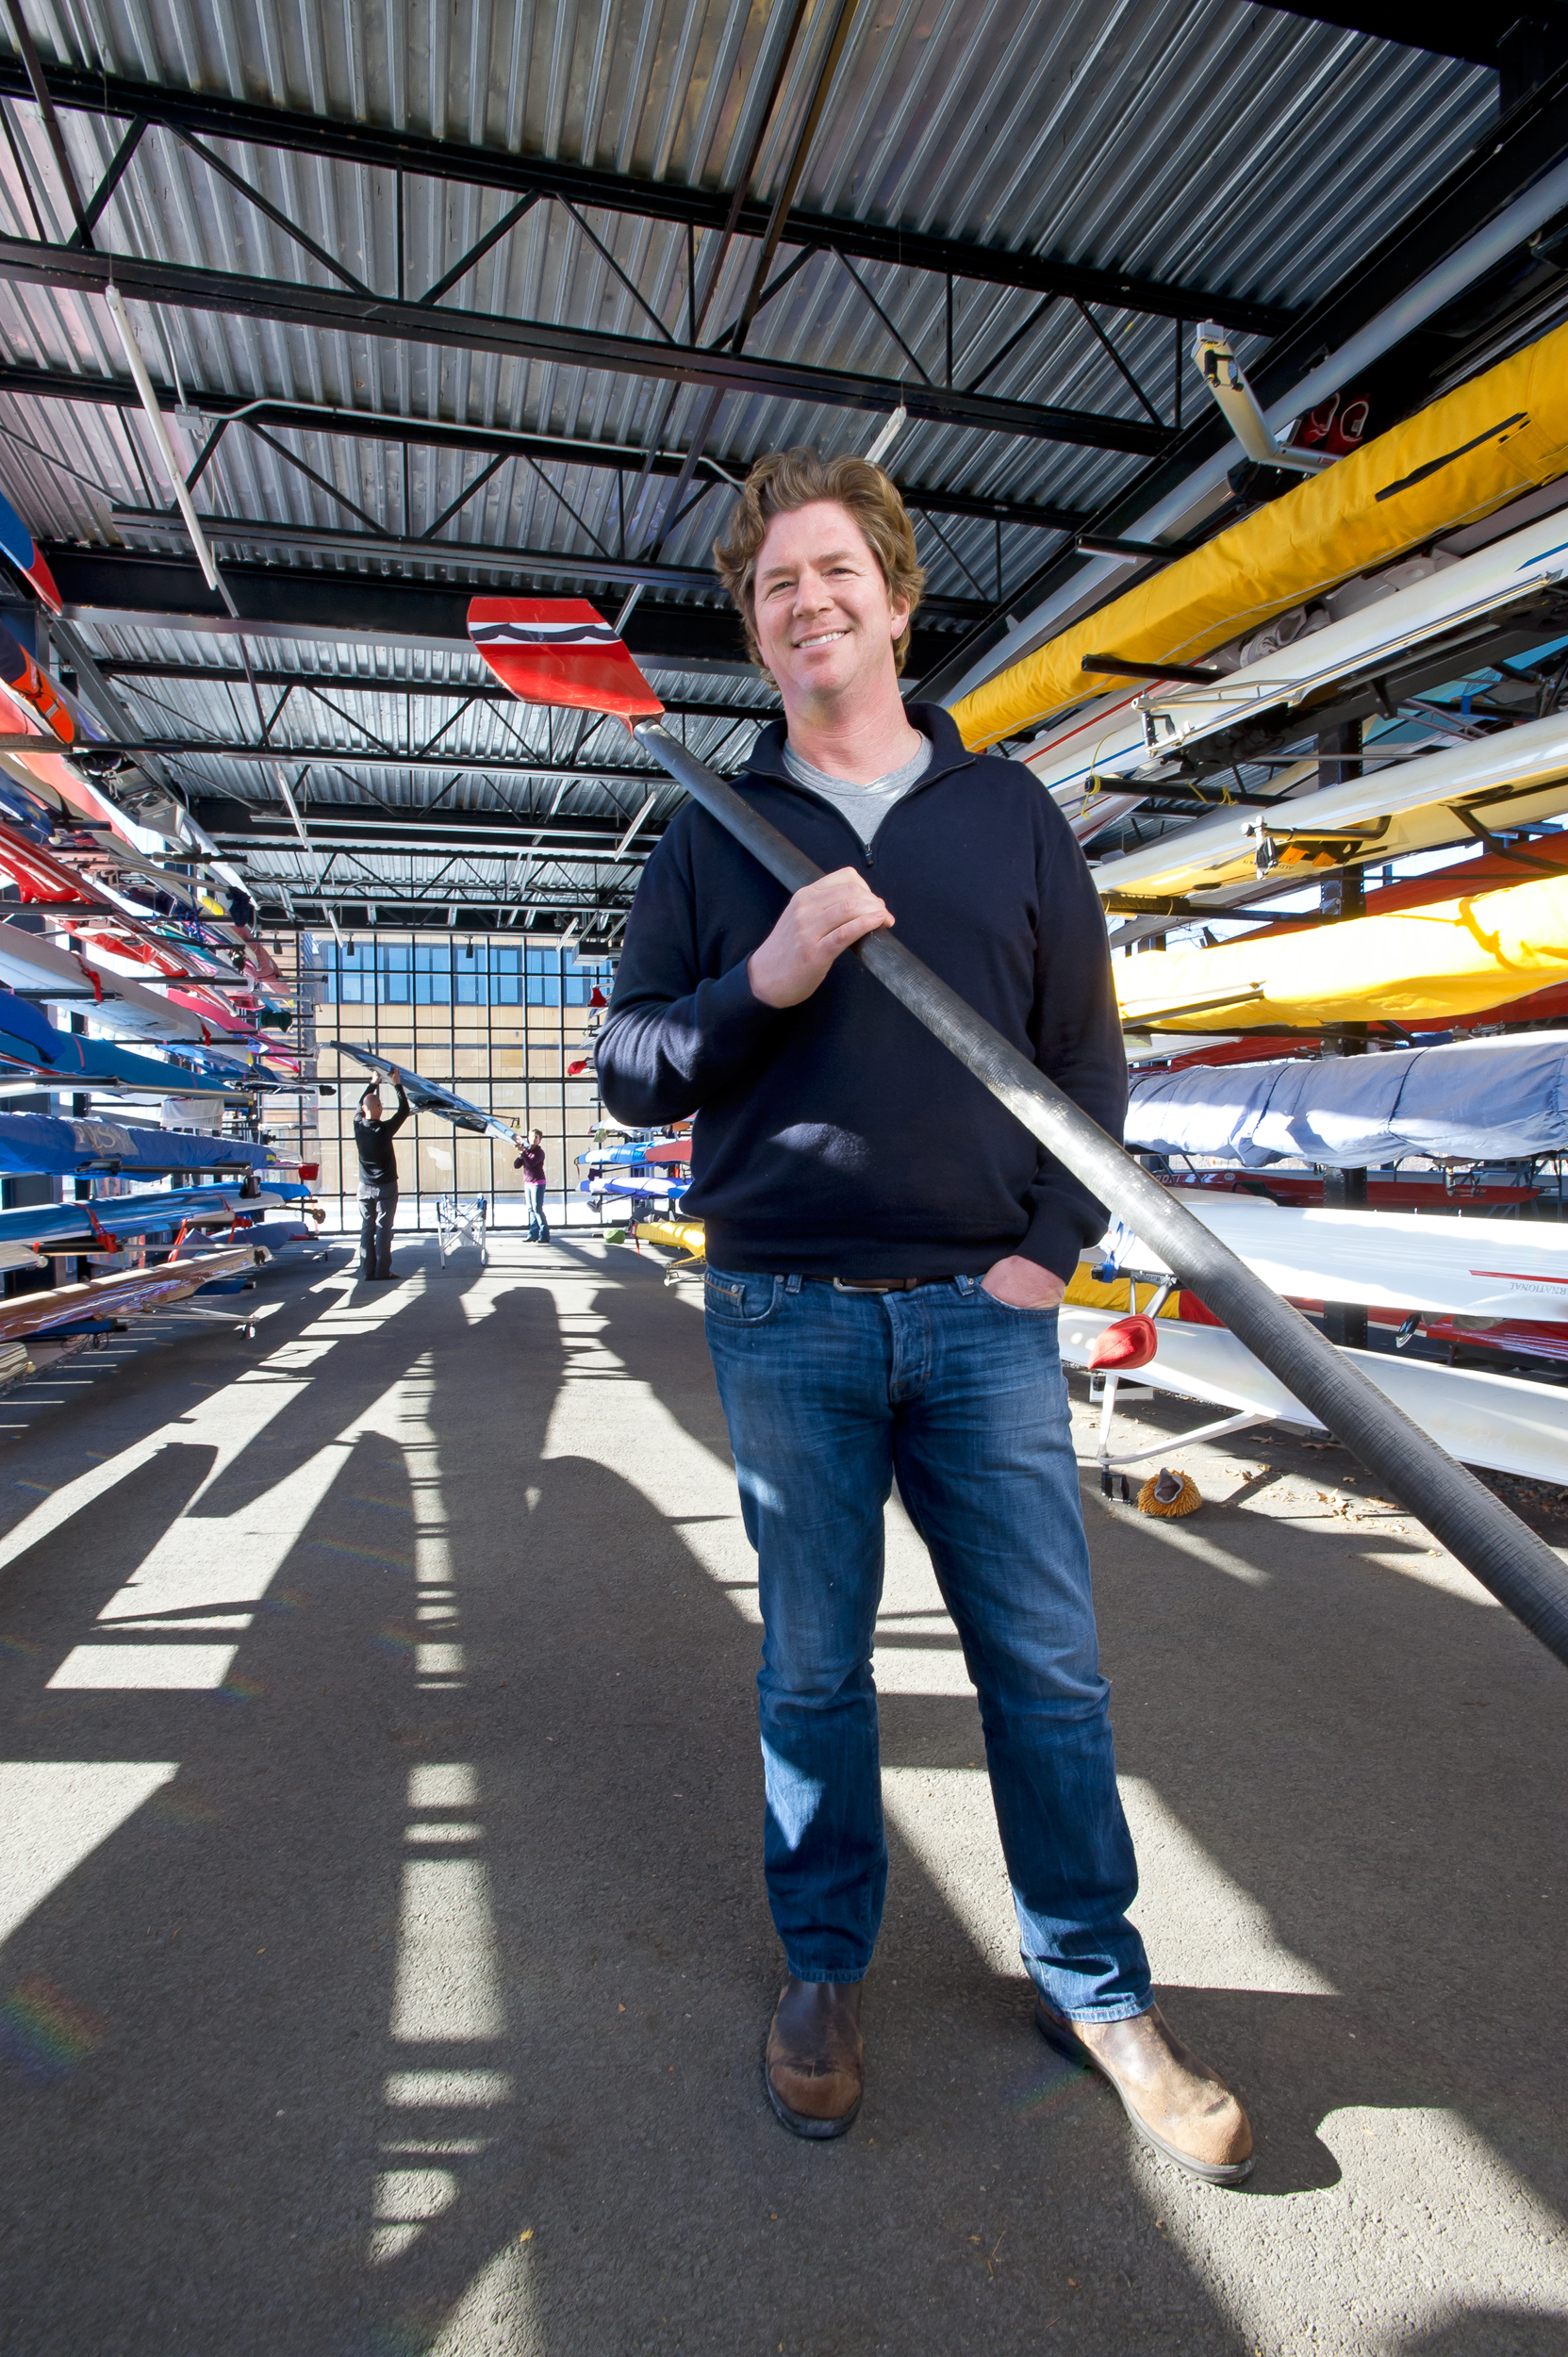  Bruce H. Smith, Executive Director of Community Rowing 